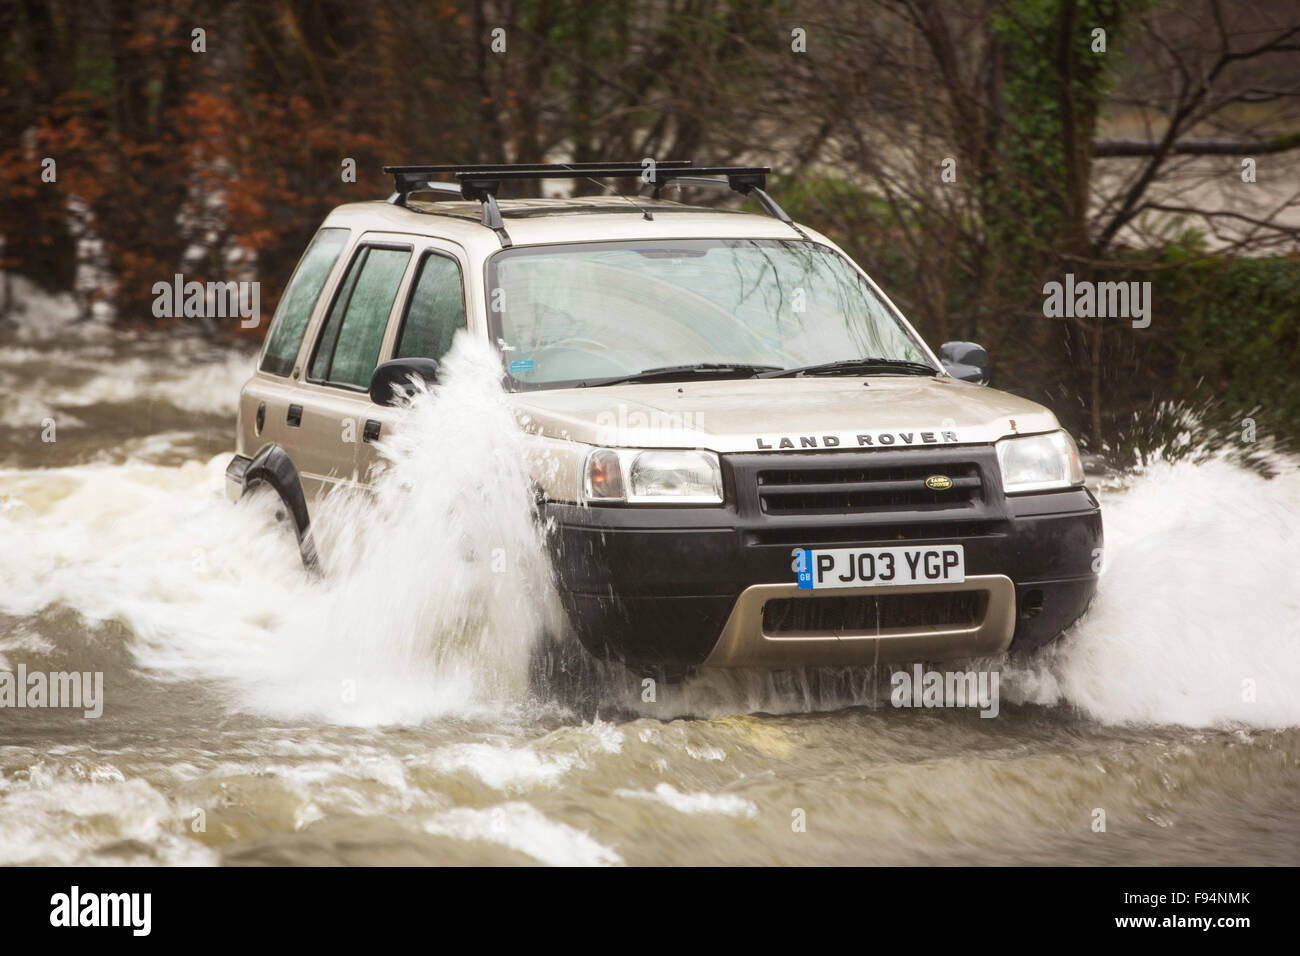 A car going through flood waters on the Ambleside, Coniston road at Rothay bridge in the Lake District on Saturday 5th December Stock Photo